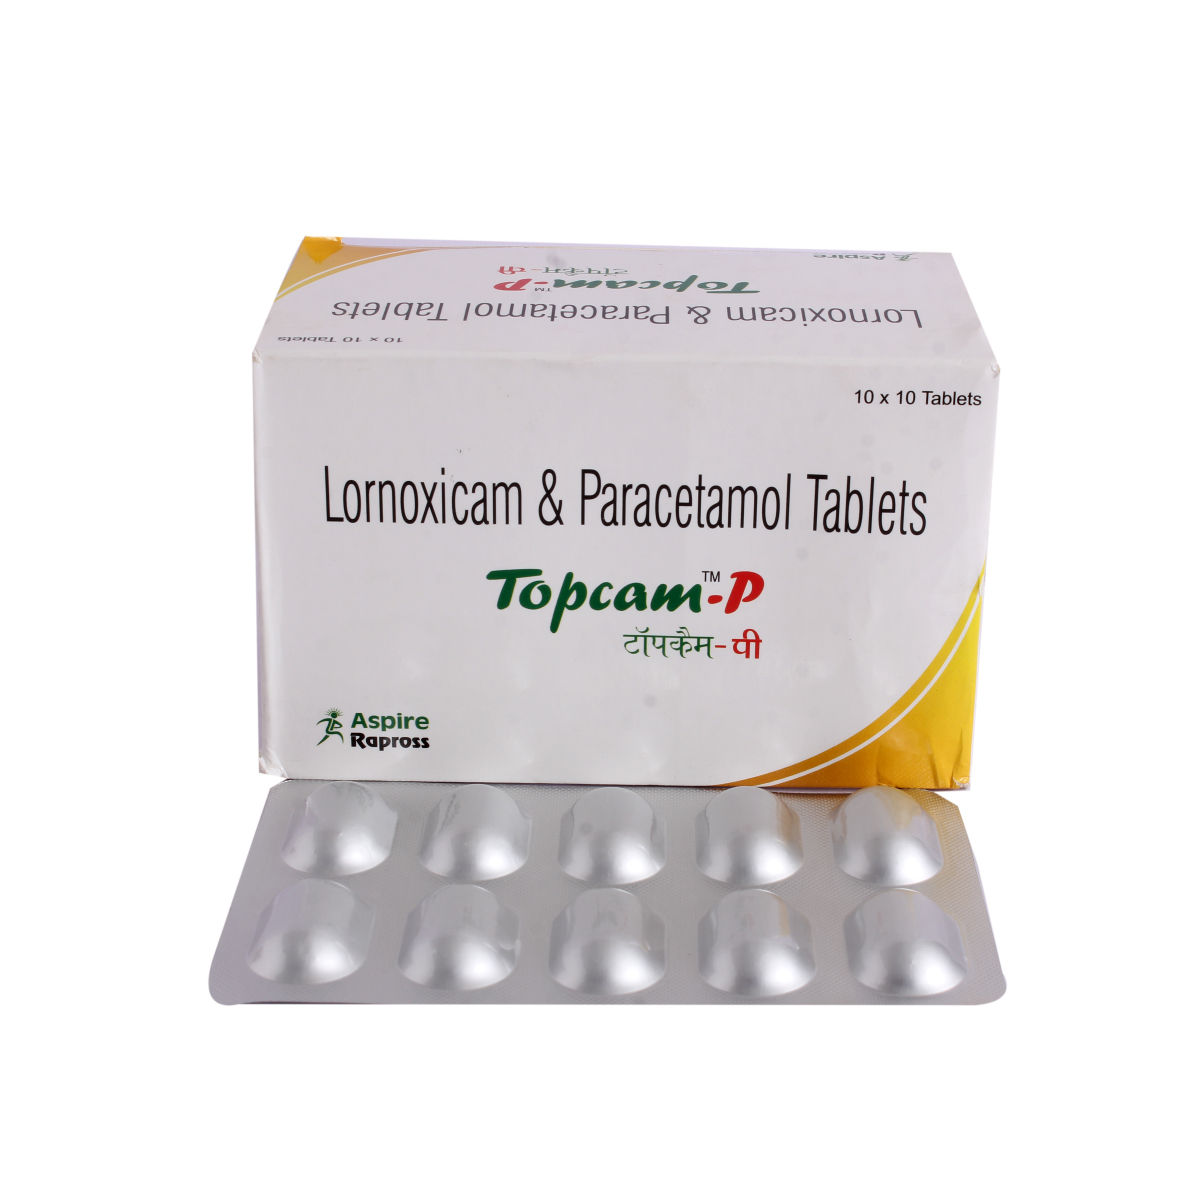 TOPCAM P TABLET Price, Uses, Side Effects, Composition - Apollo ...